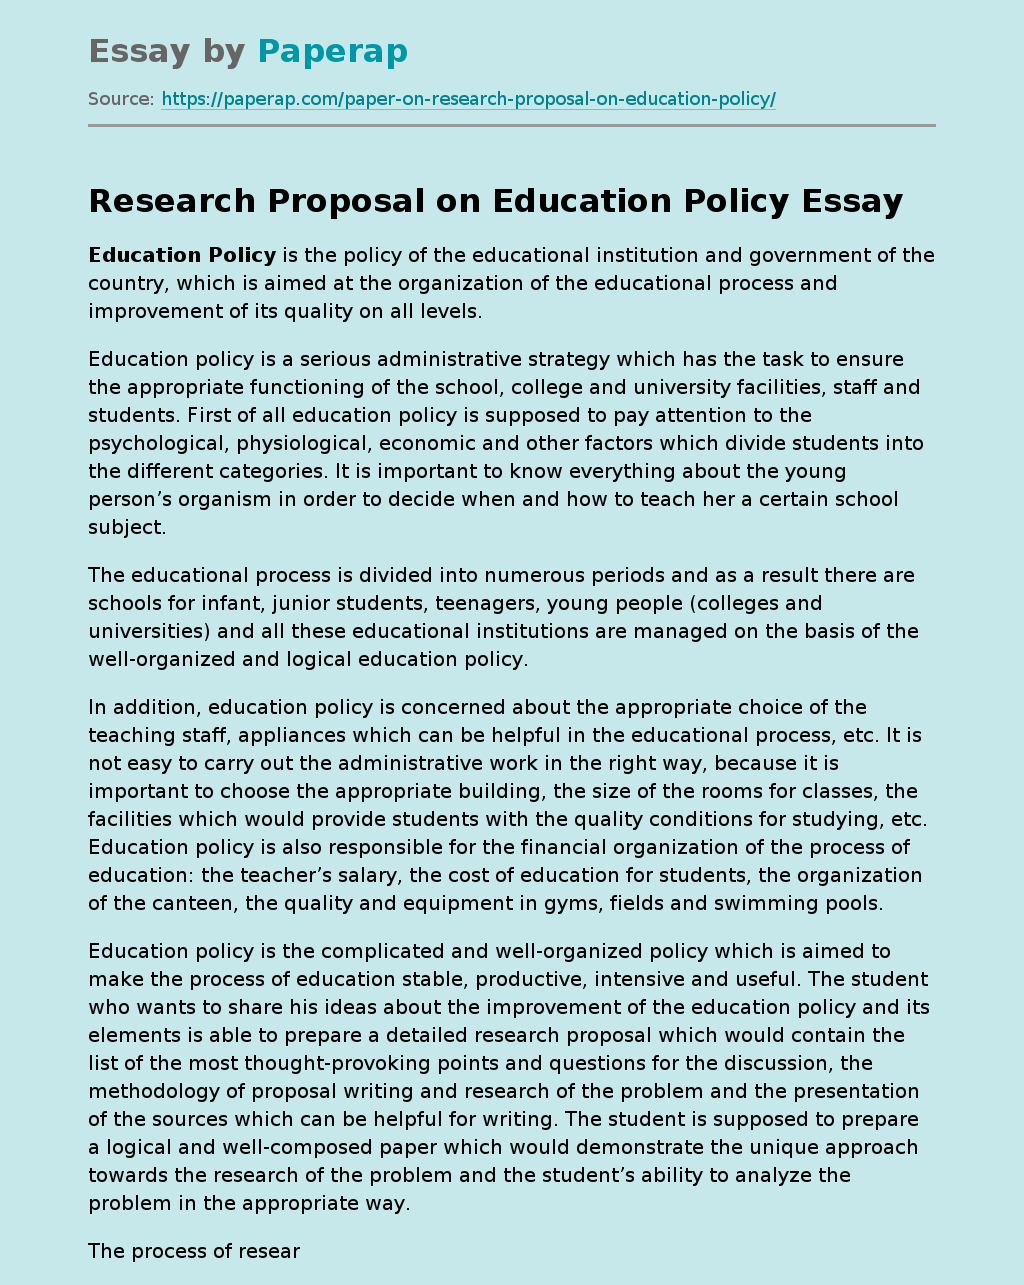 Research Proposal on Education Policy